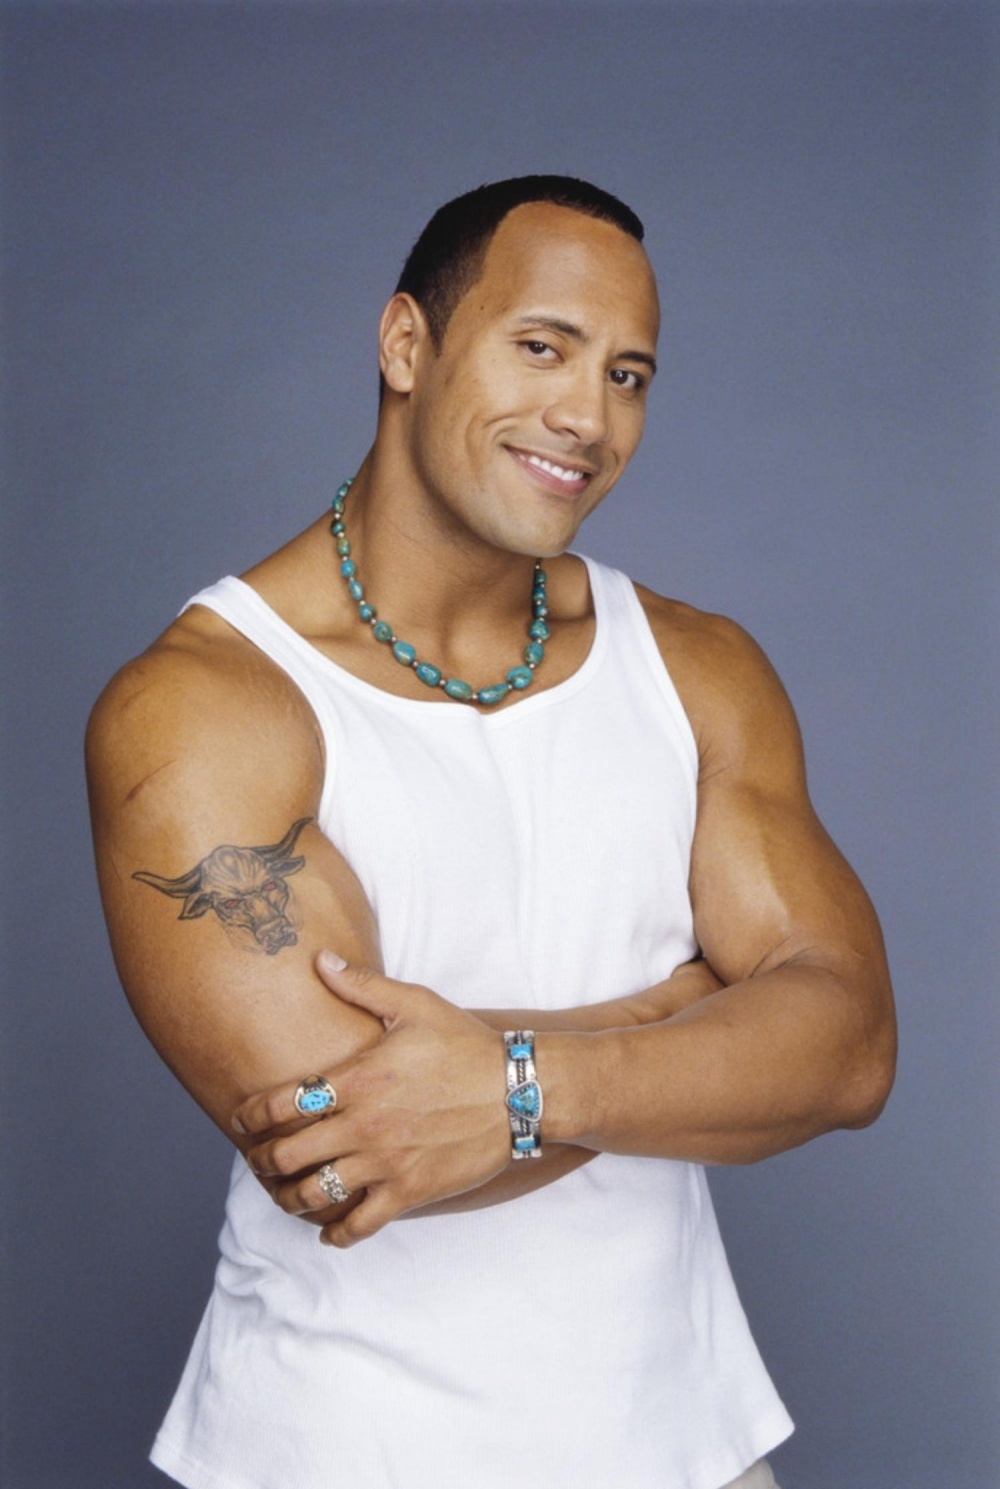 actors, dwayne johnson, men, people for android